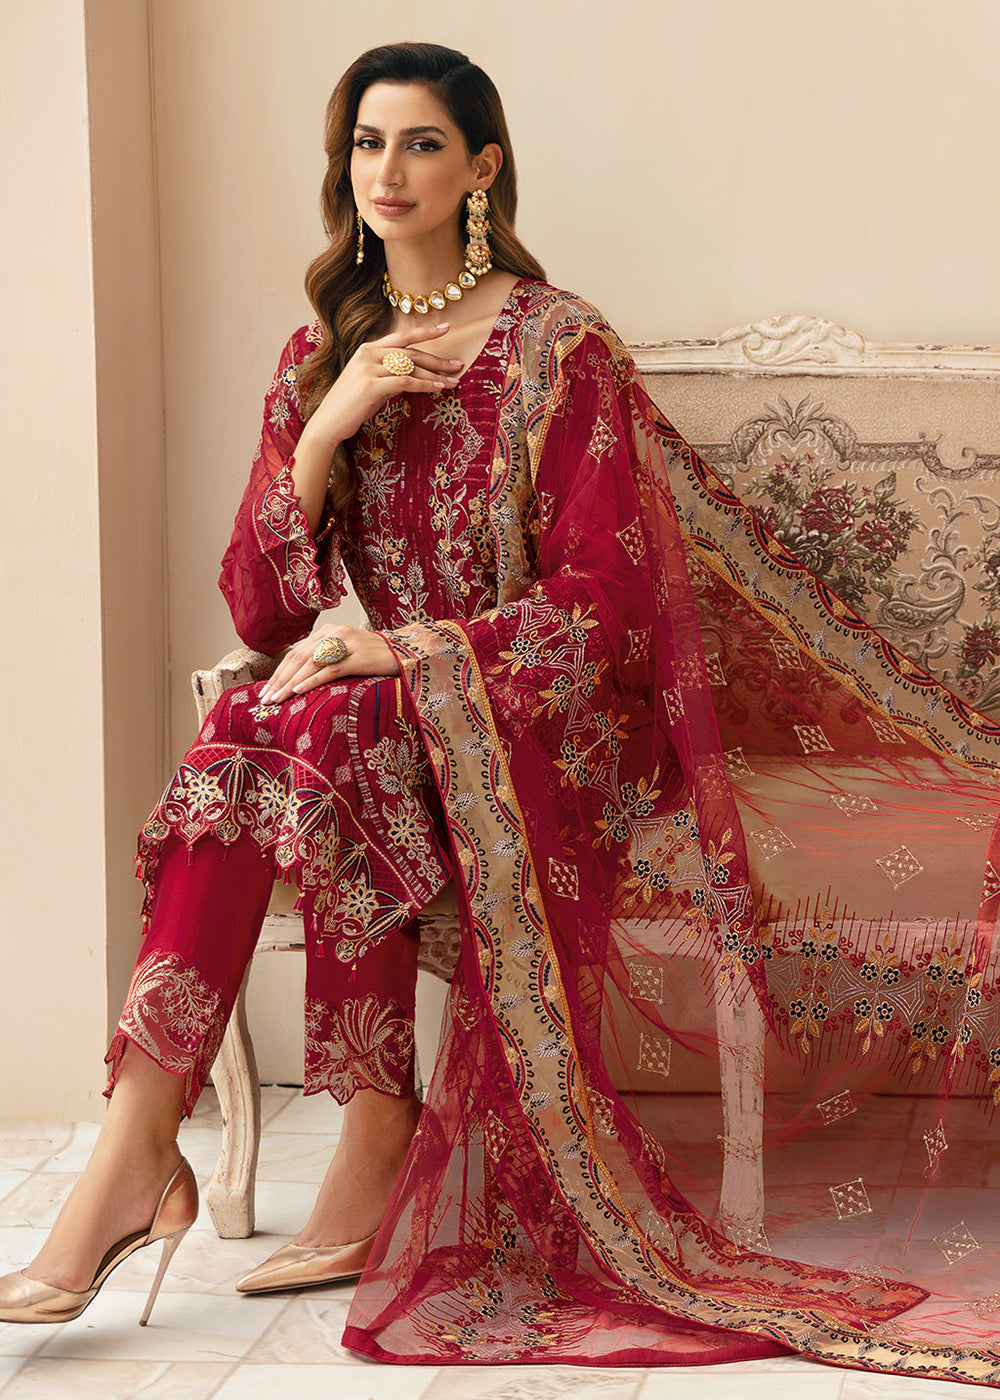 Buy Now Chevron Luxury Chiffon Collection 24 by Ramsha | A-907 Online at Empress in USA, UK, Canada, Germany, Italy, Dubai & Worldwide at Empress Clothing. 